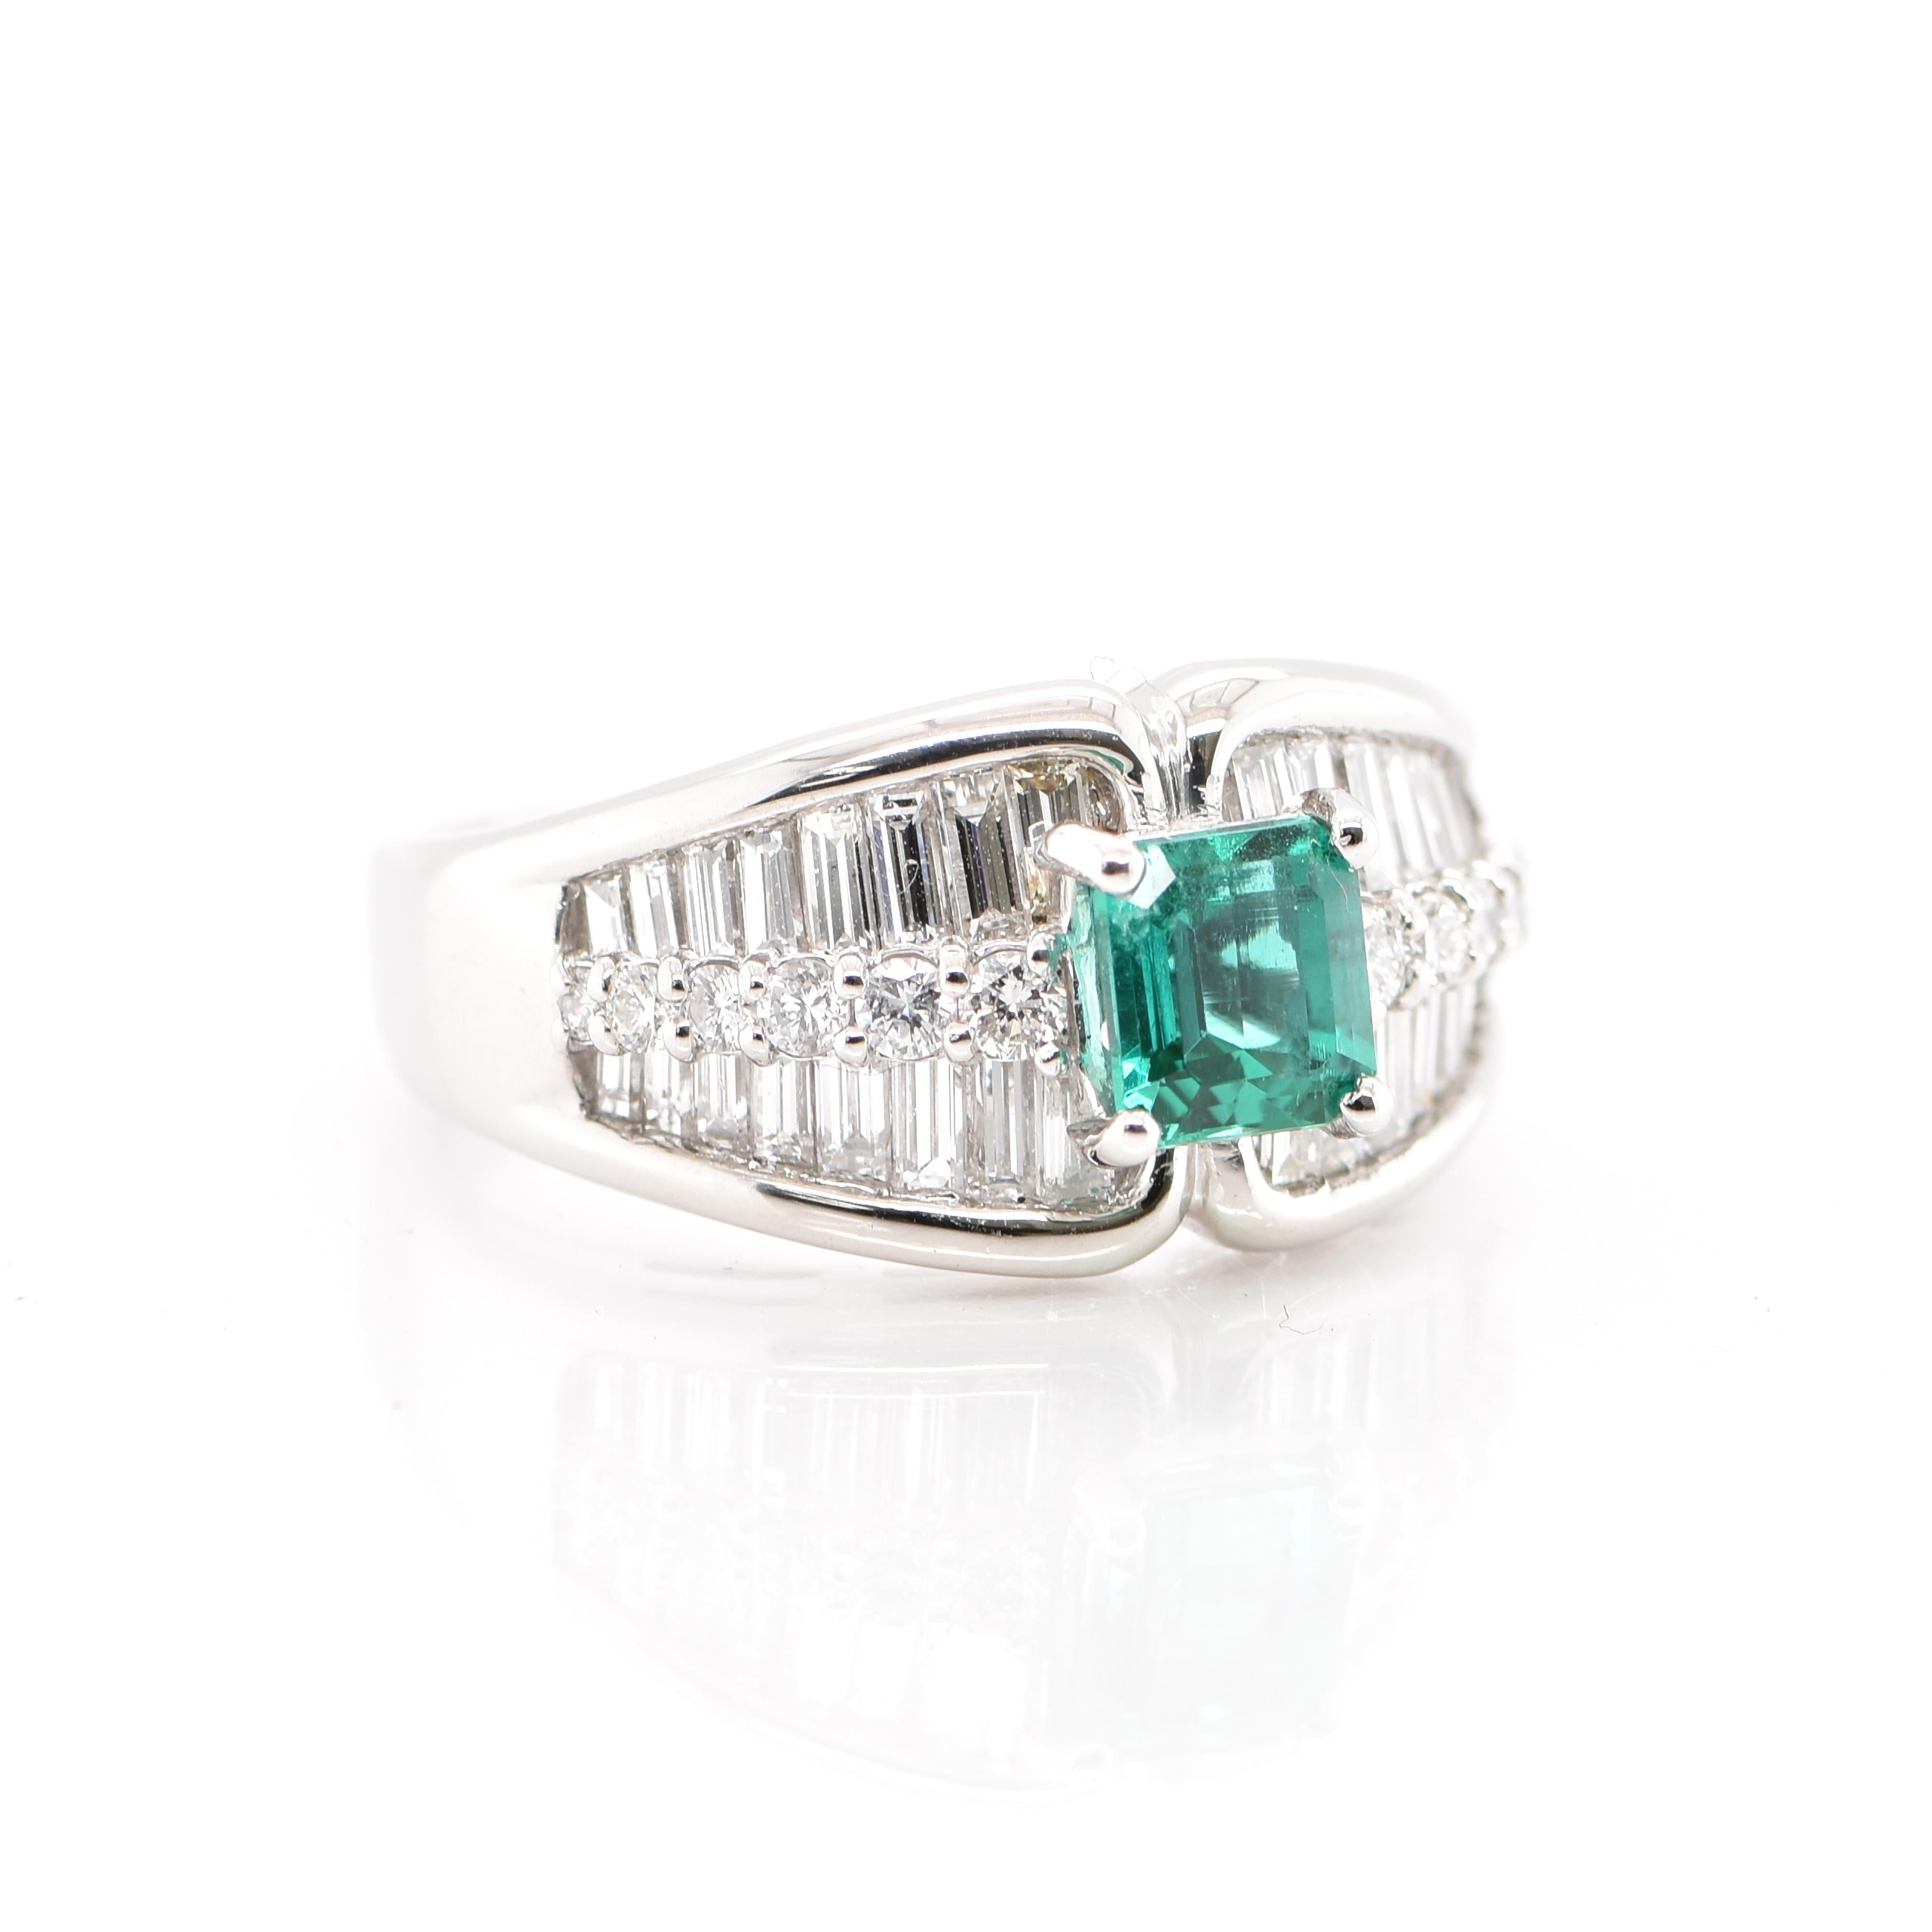 Modern GIA Certified 1.03 Carat 'No Oil' (Untreated) Colombian Emerald Ring